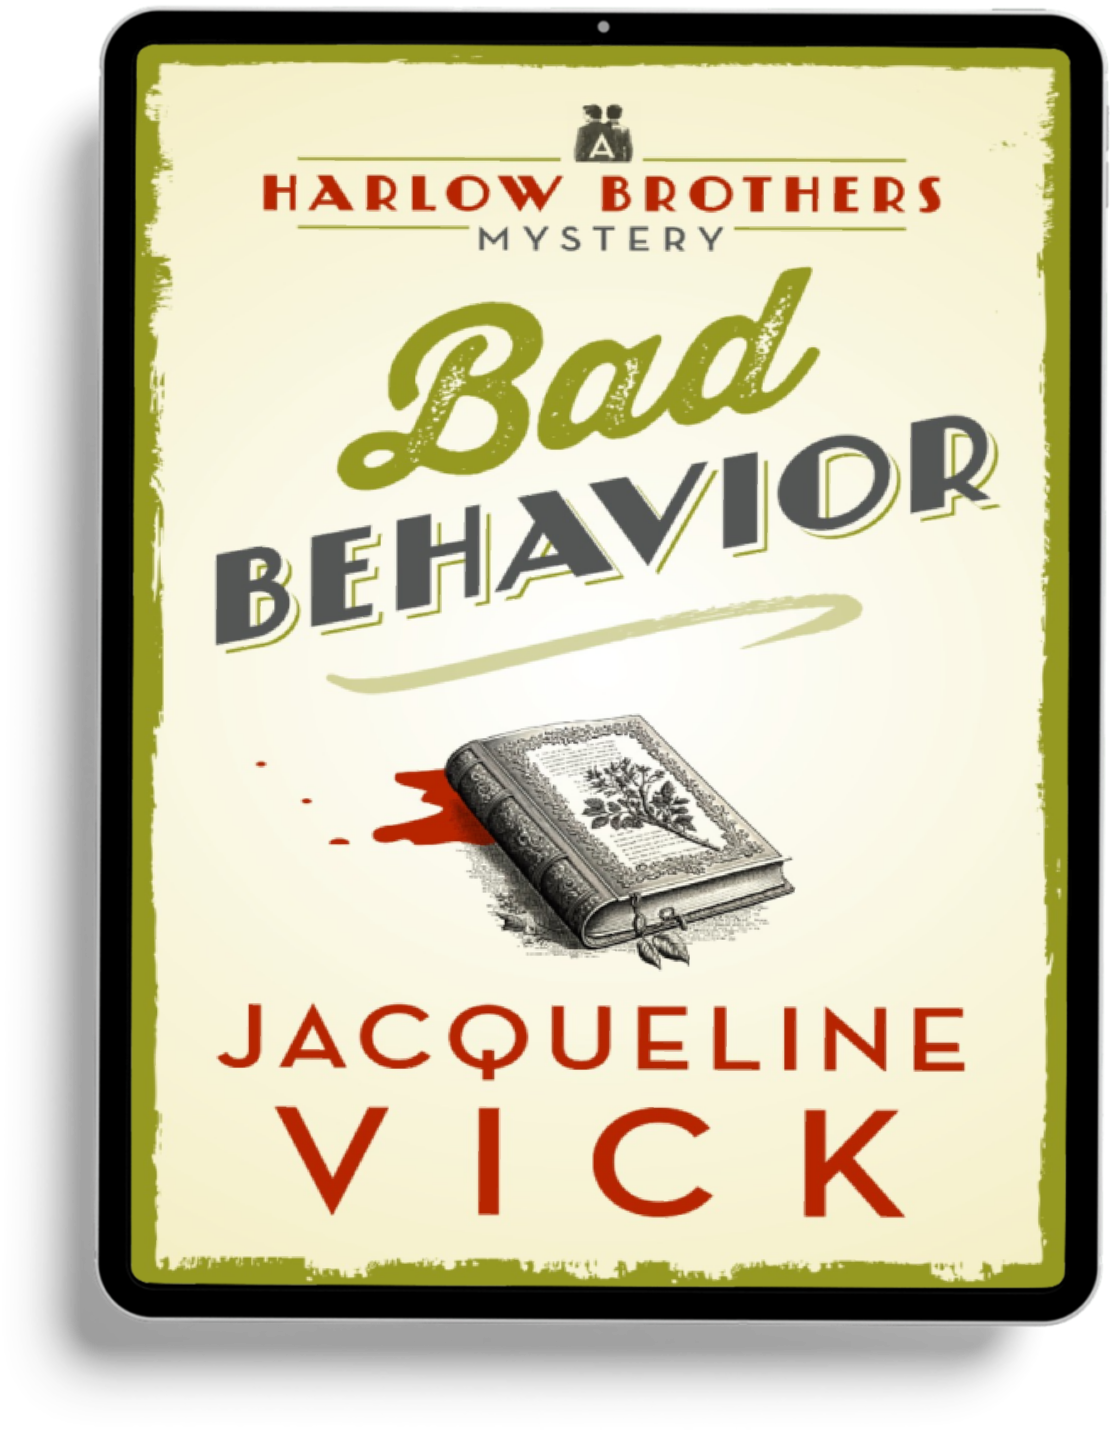 Bad Behavior EBOOK (Book 2 in the Harlow Brothers Mysteries)